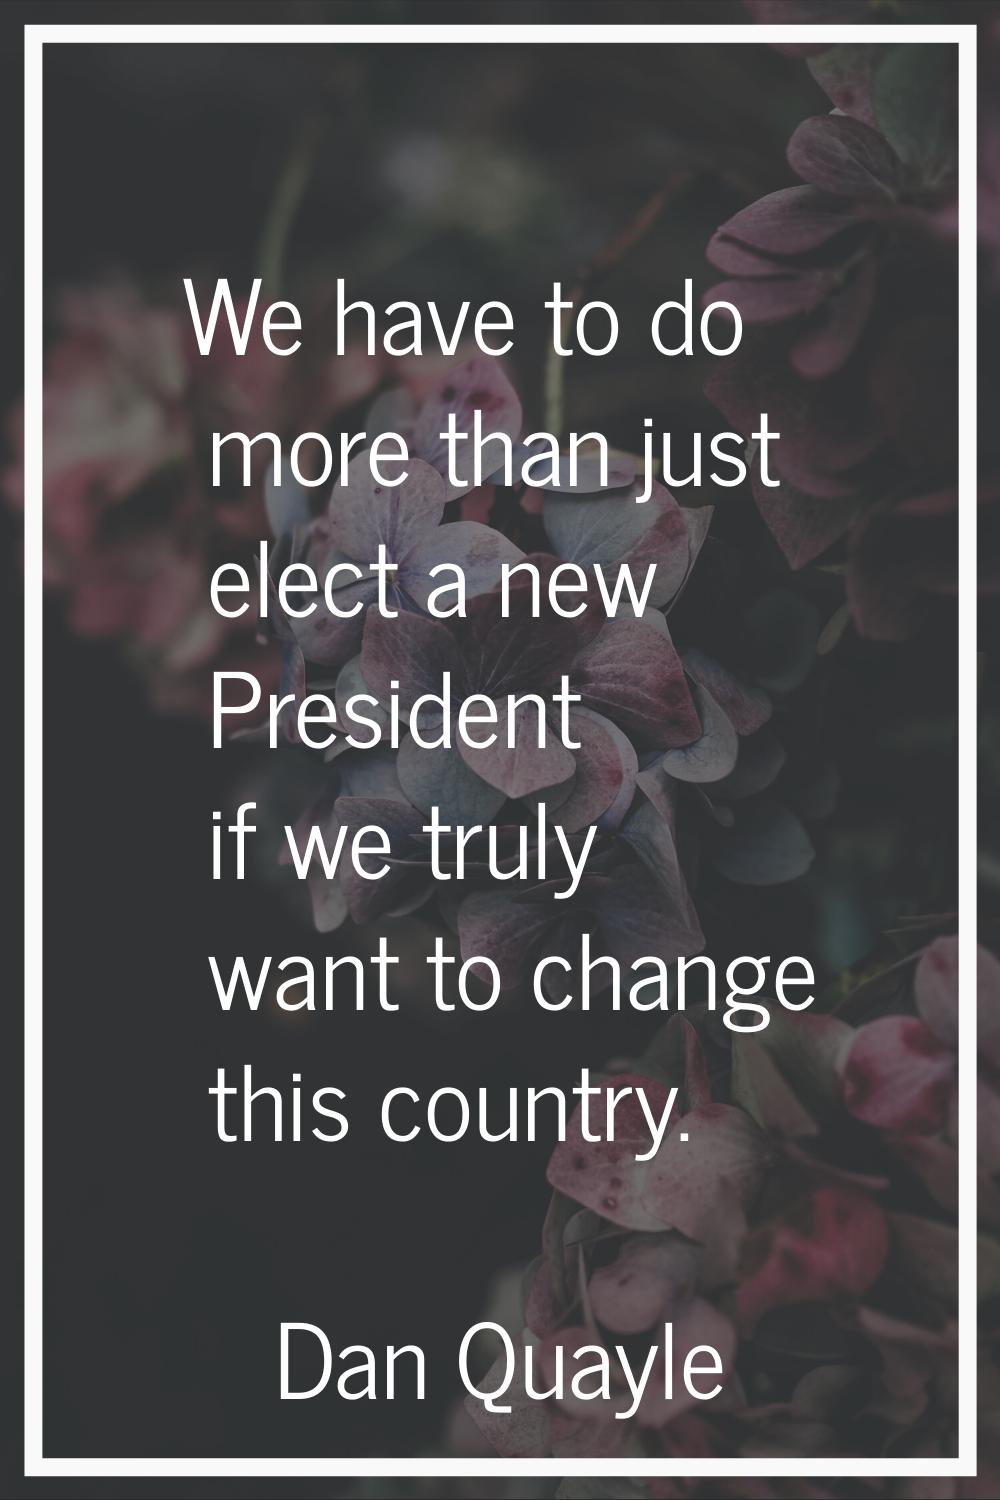 We have to do more than just elect a new President if we truly want to change this country.